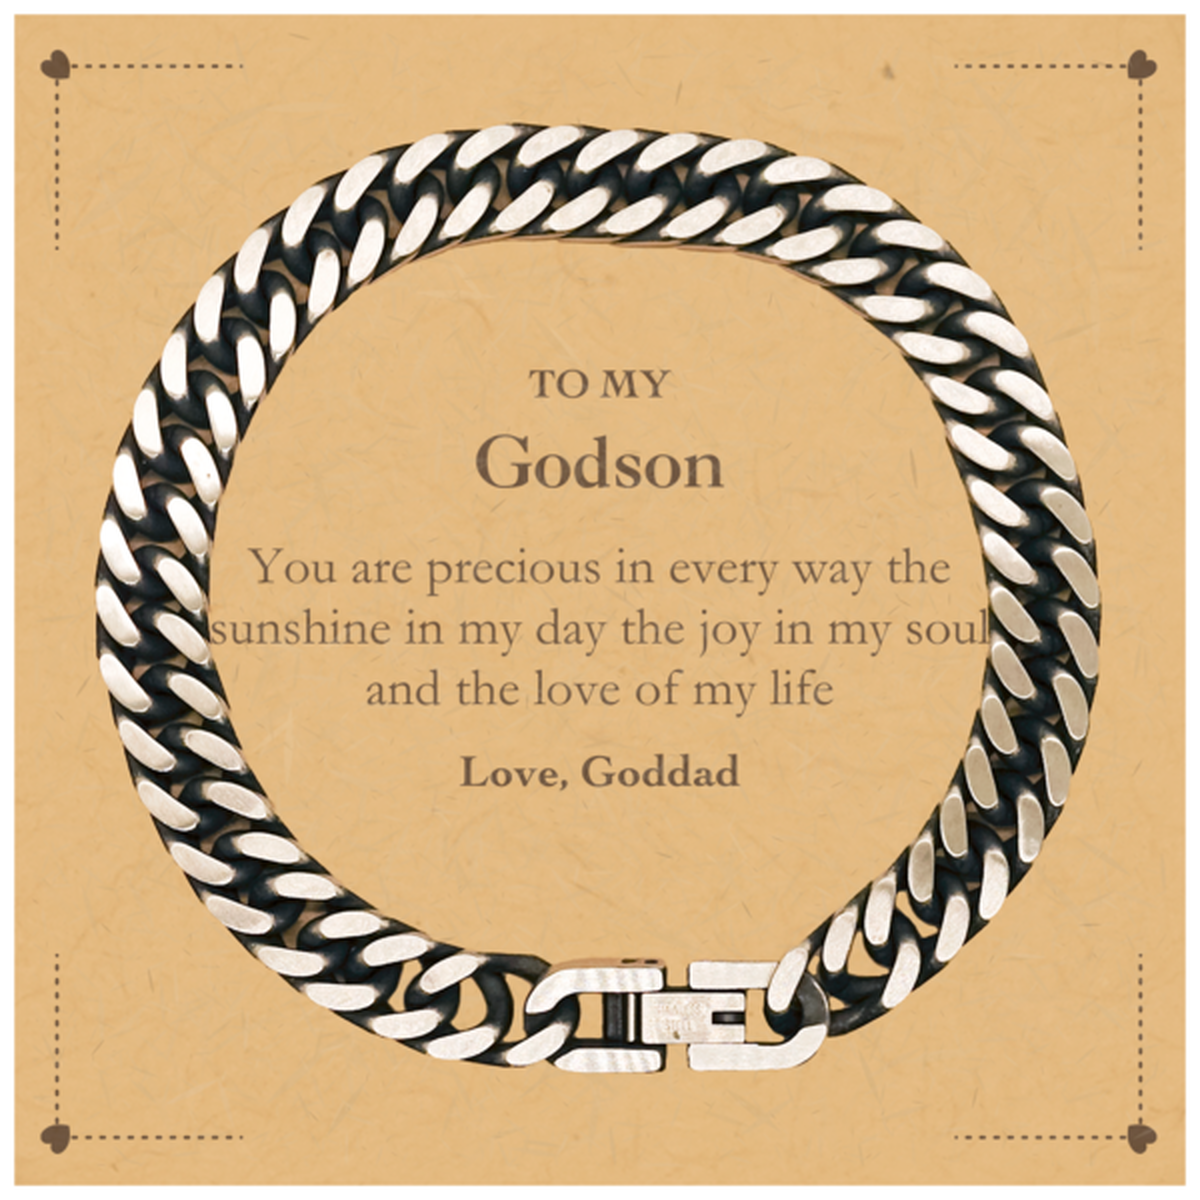 Graduation Gifts for Godson Cuban Link Chain Bracelet Present from Goddad, Christmas Godson Birthday Gifts Godson You are precious in every way the sunshine in my day. Love, Goddad